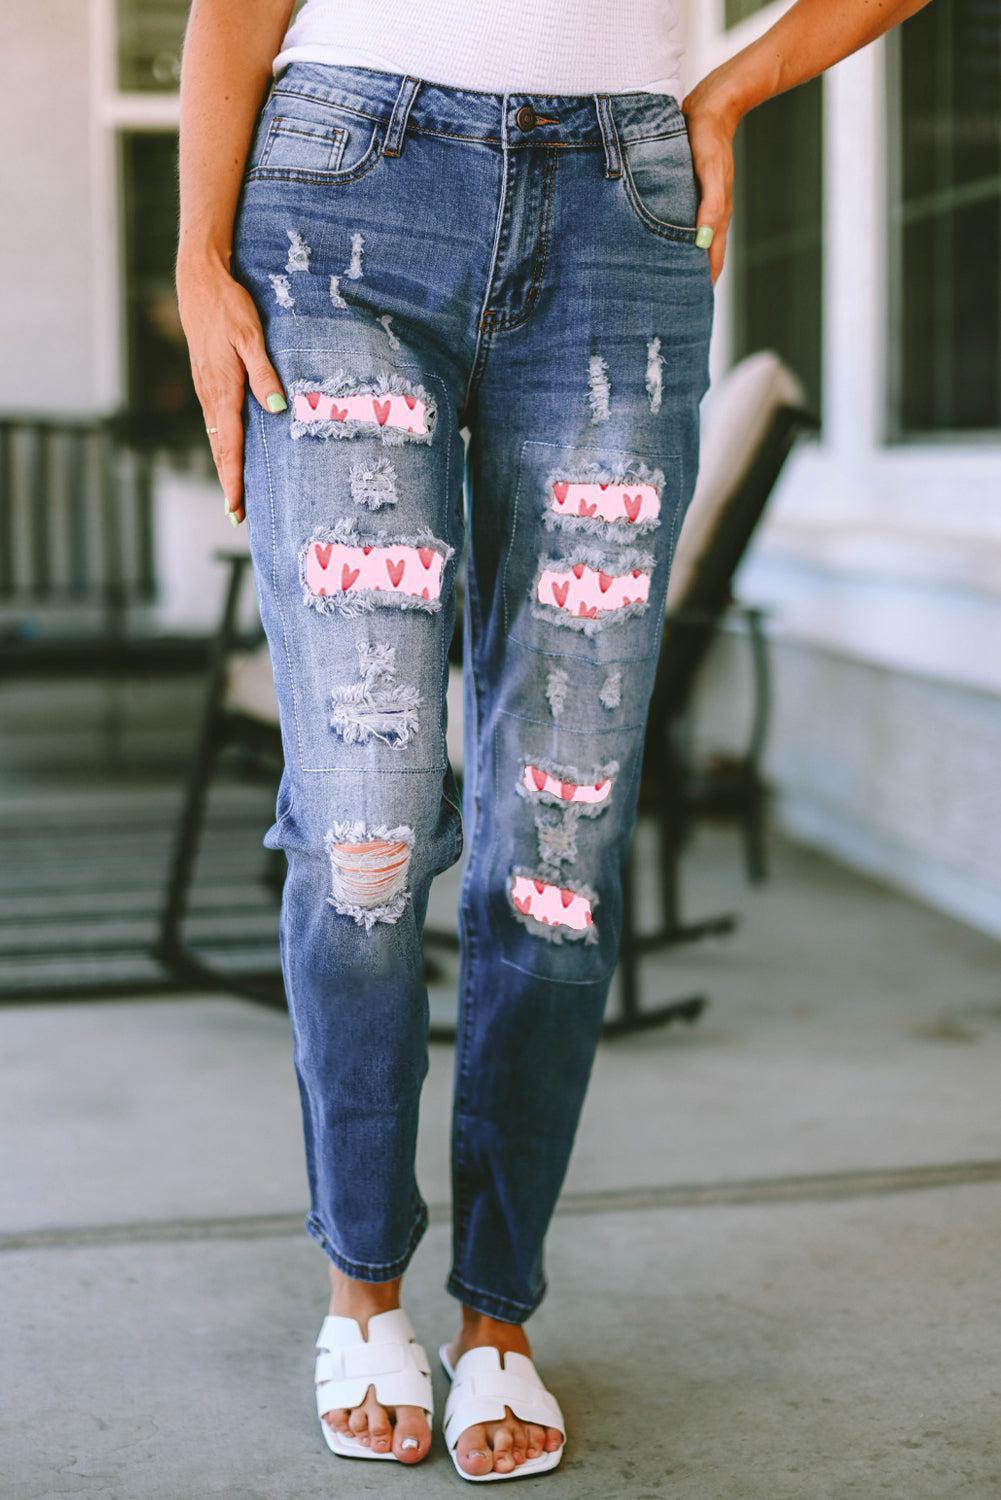 a woman standing on a sidewalk wearing ripped jeans